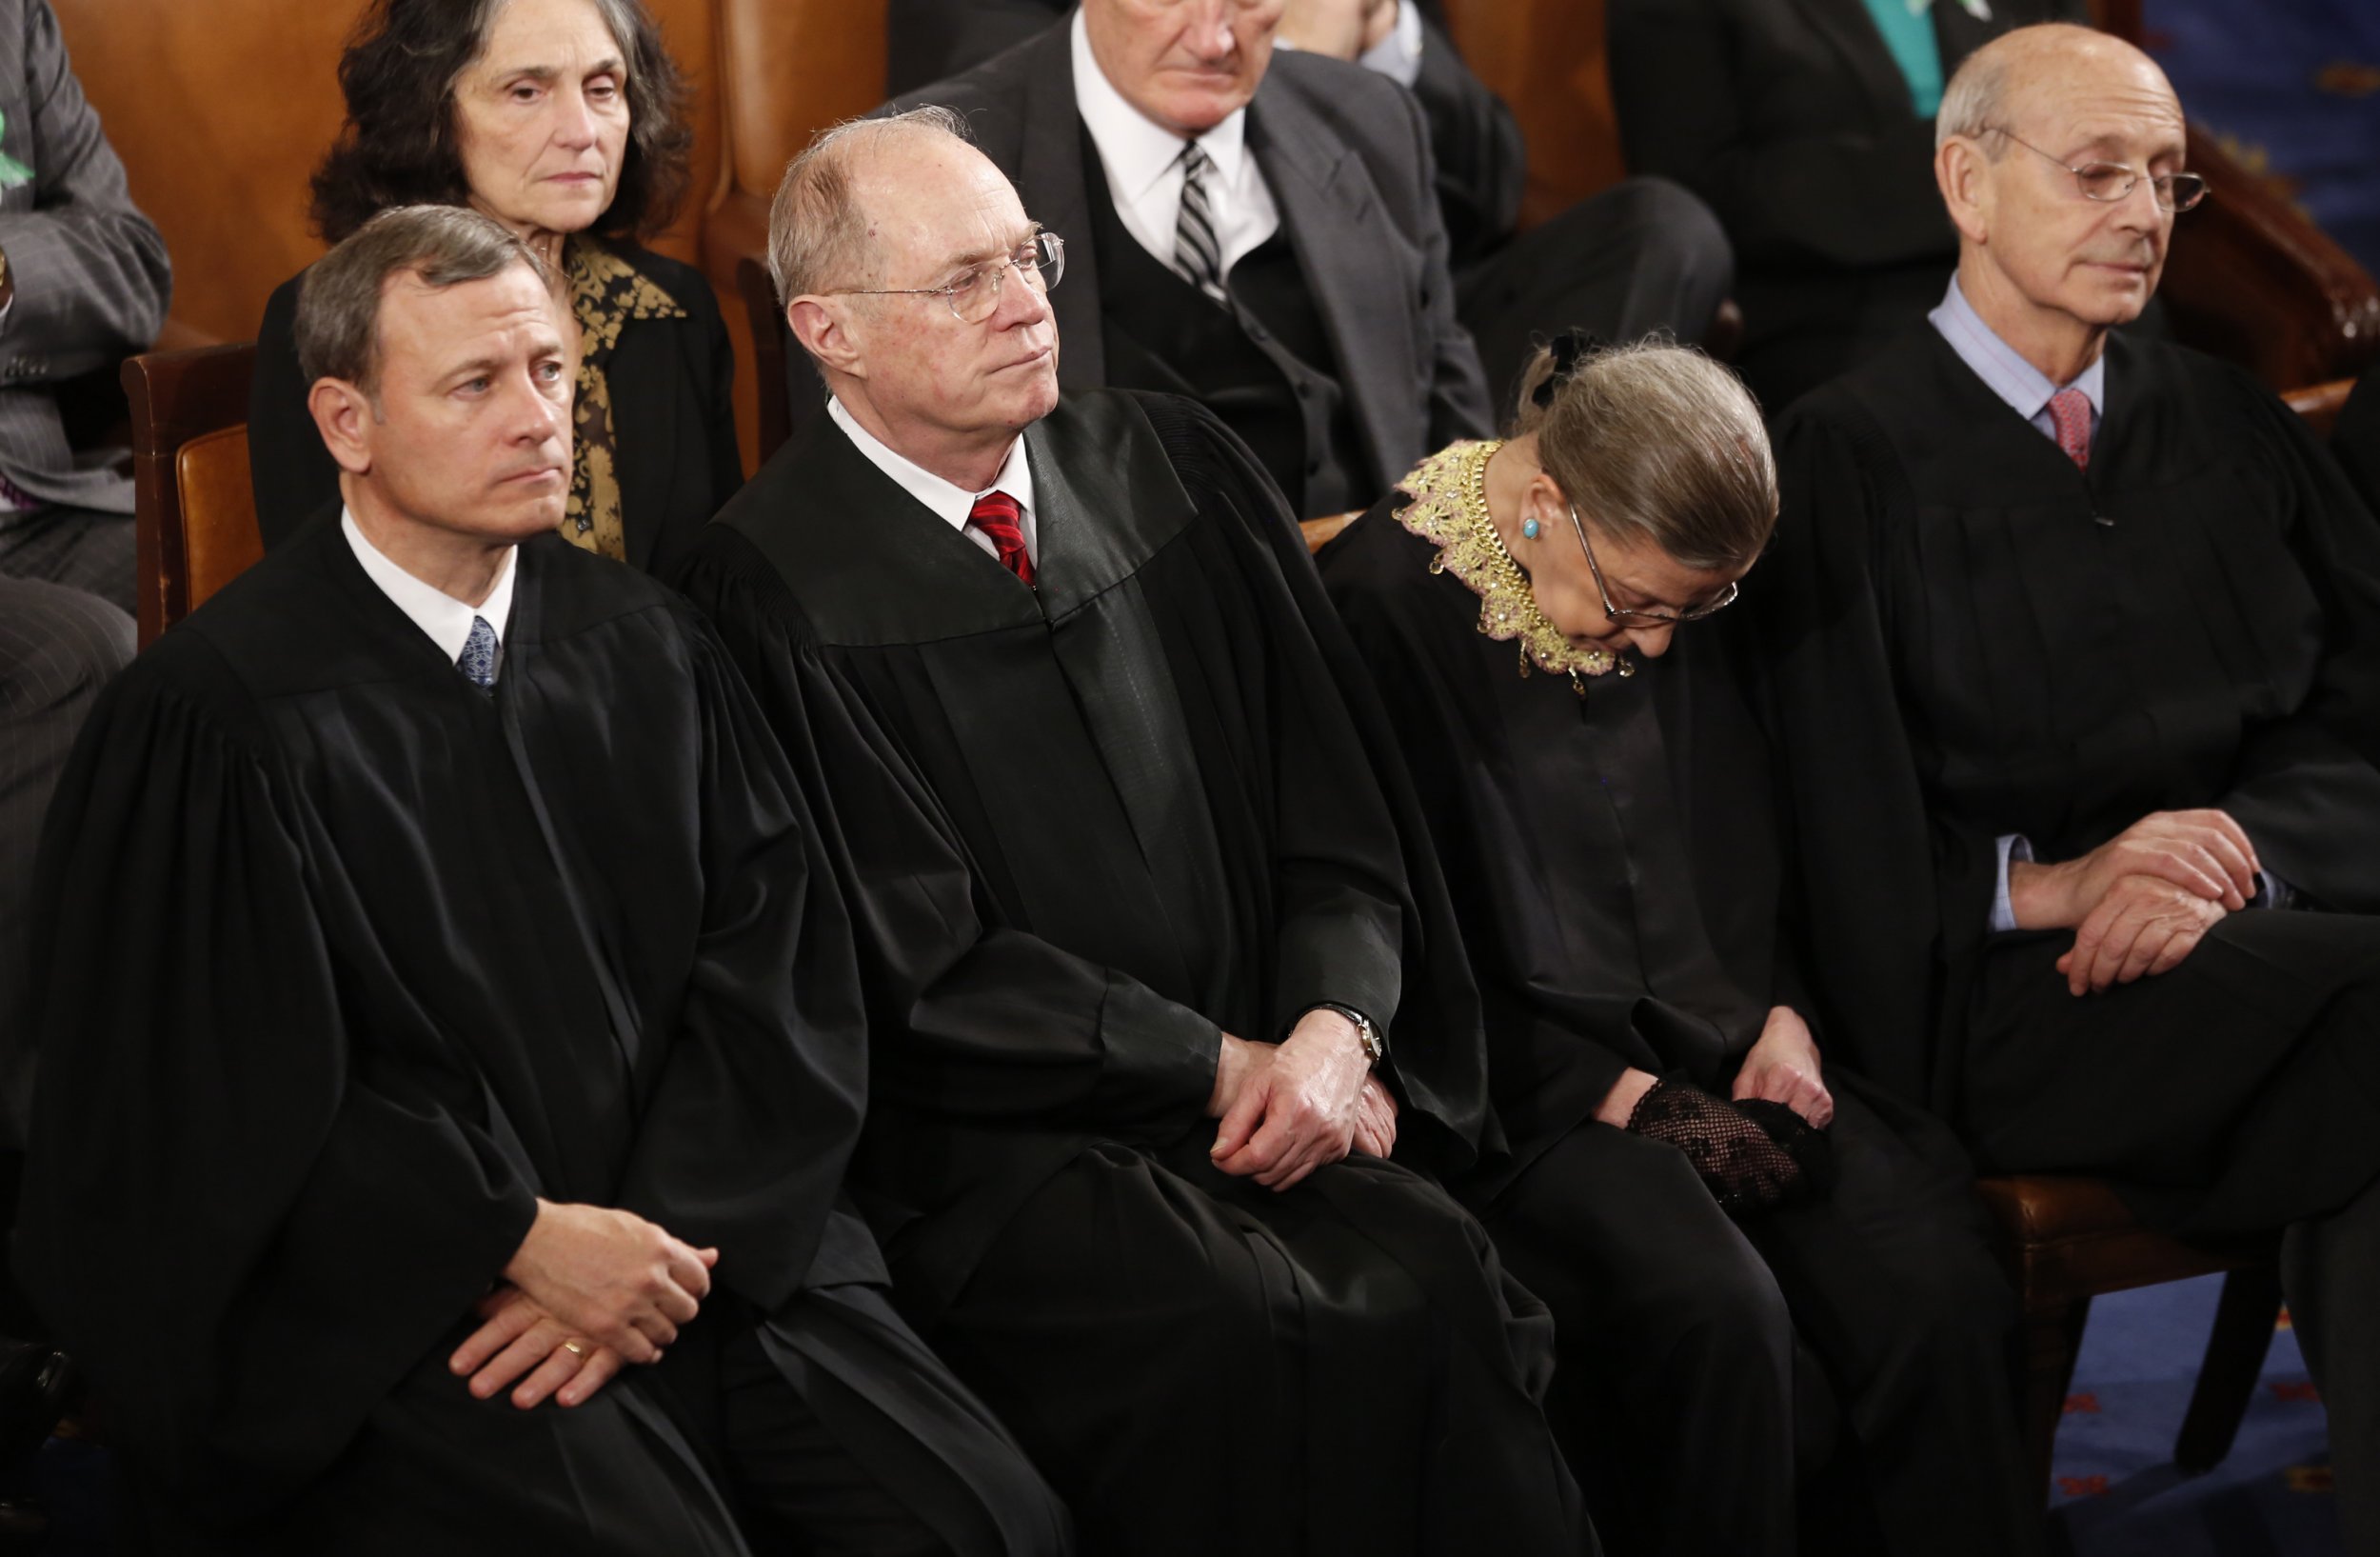 Ruth Bader Ginsburg Took a Tipsy Nap at the State of the Union